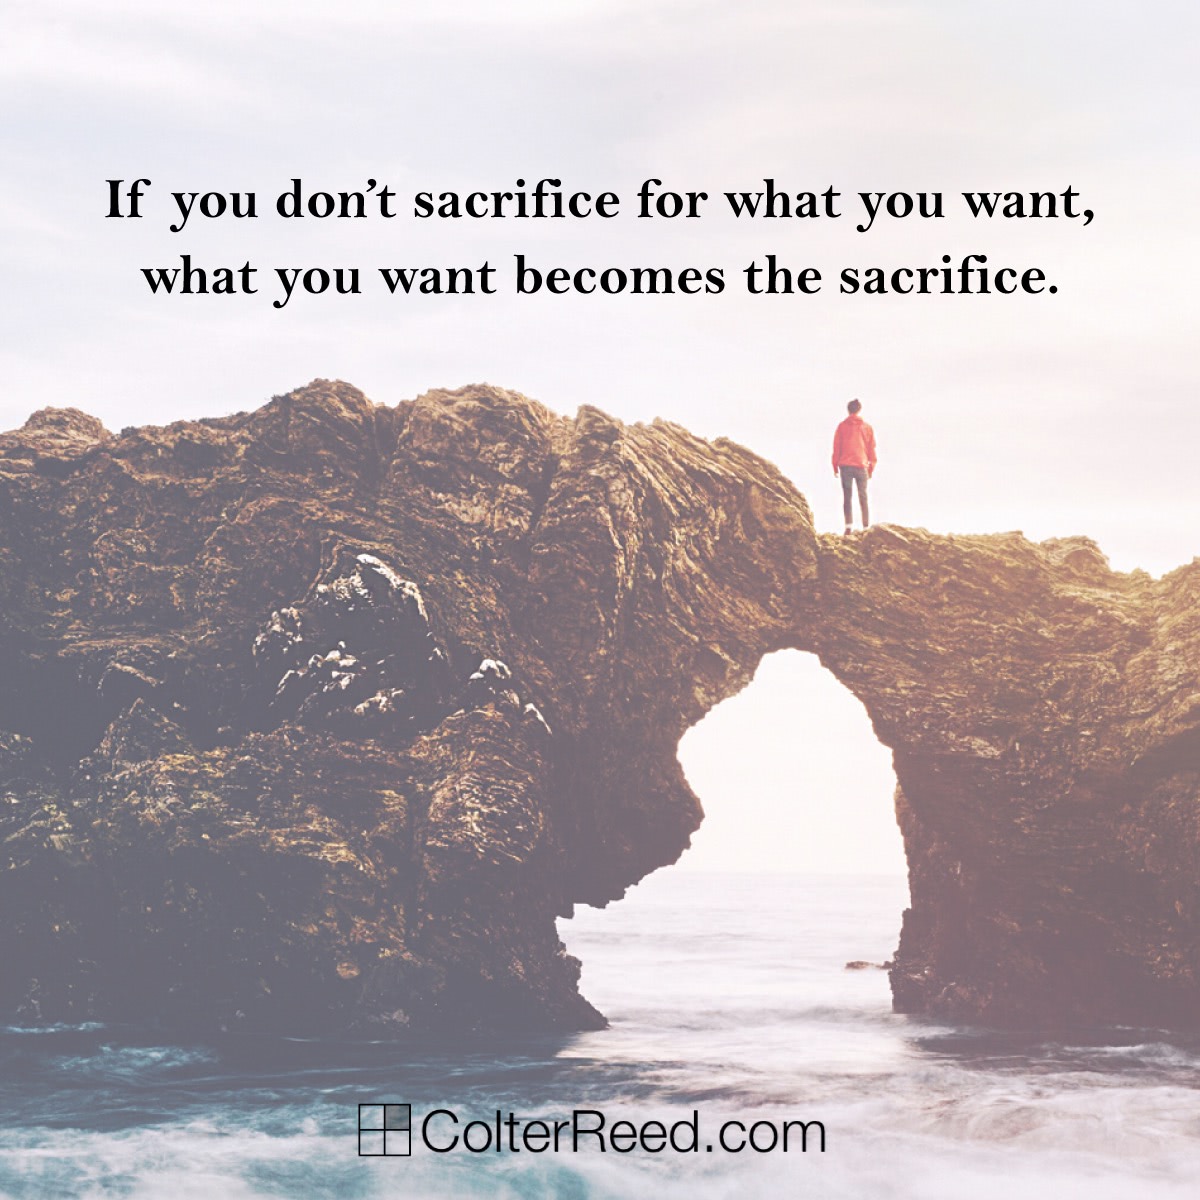 If you don’t sacrifice for what you want, what you want becomes the sacrifice. —Colter Reed